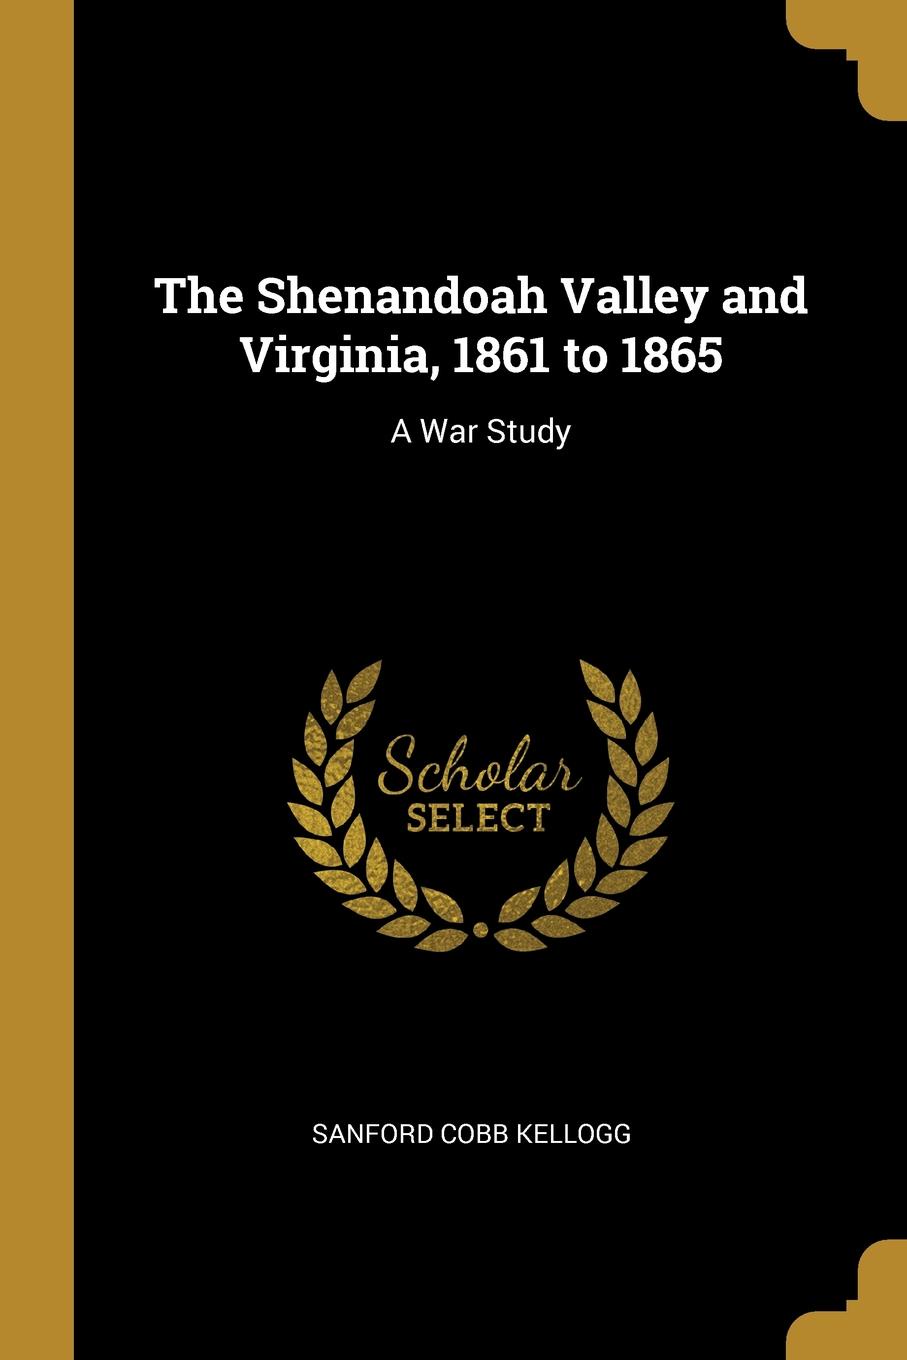 The Shenandoah Valley and Virginia, 1861 to 1865. A War Study